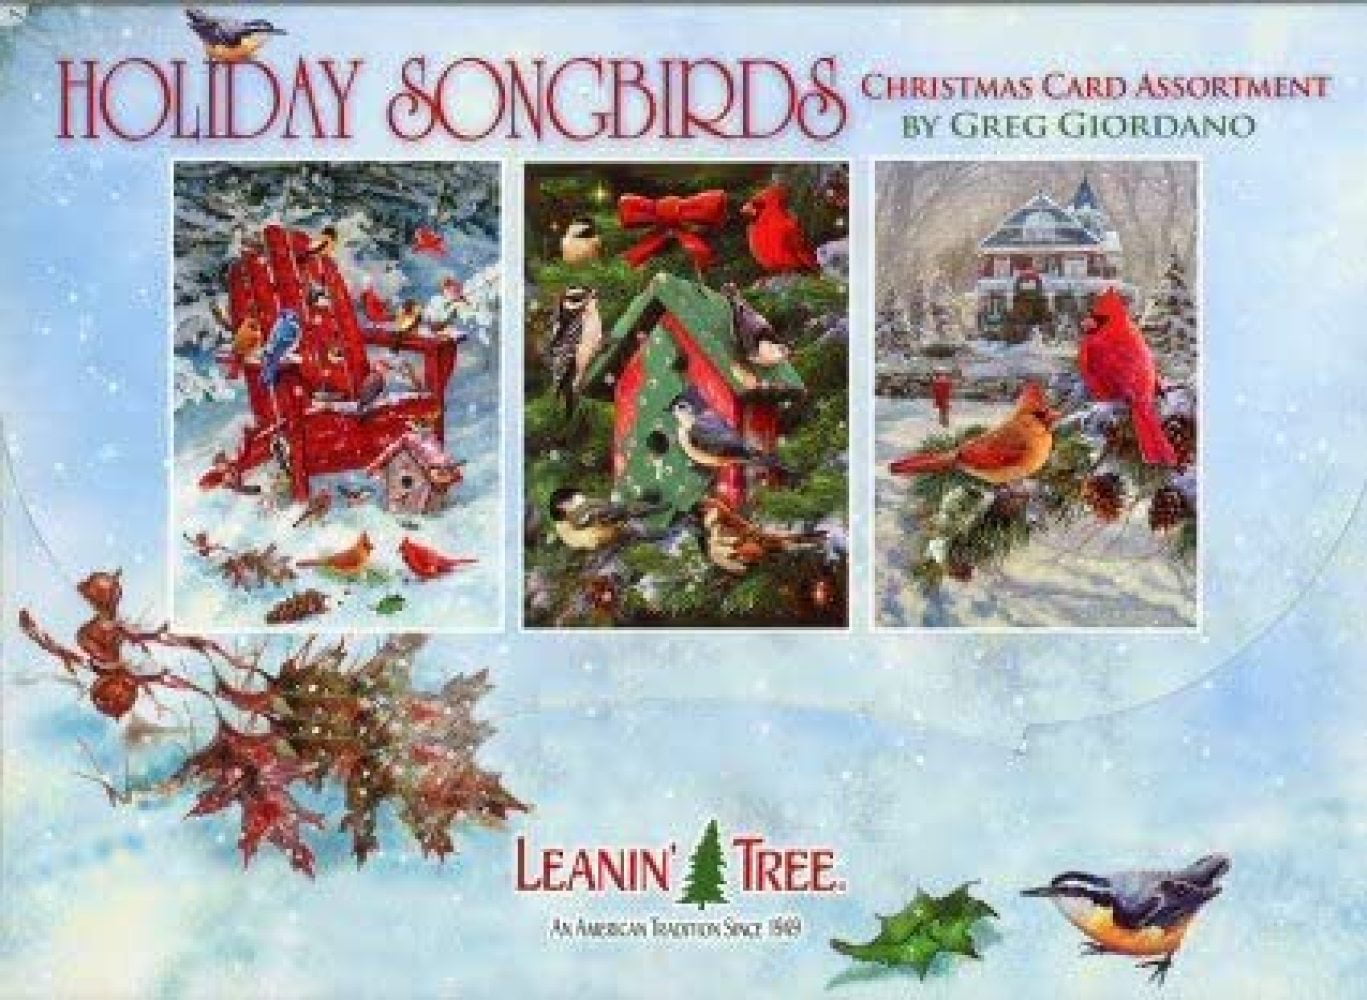 Pack of 10 Leanin' Tree Christmas cards with designed envelopes. 